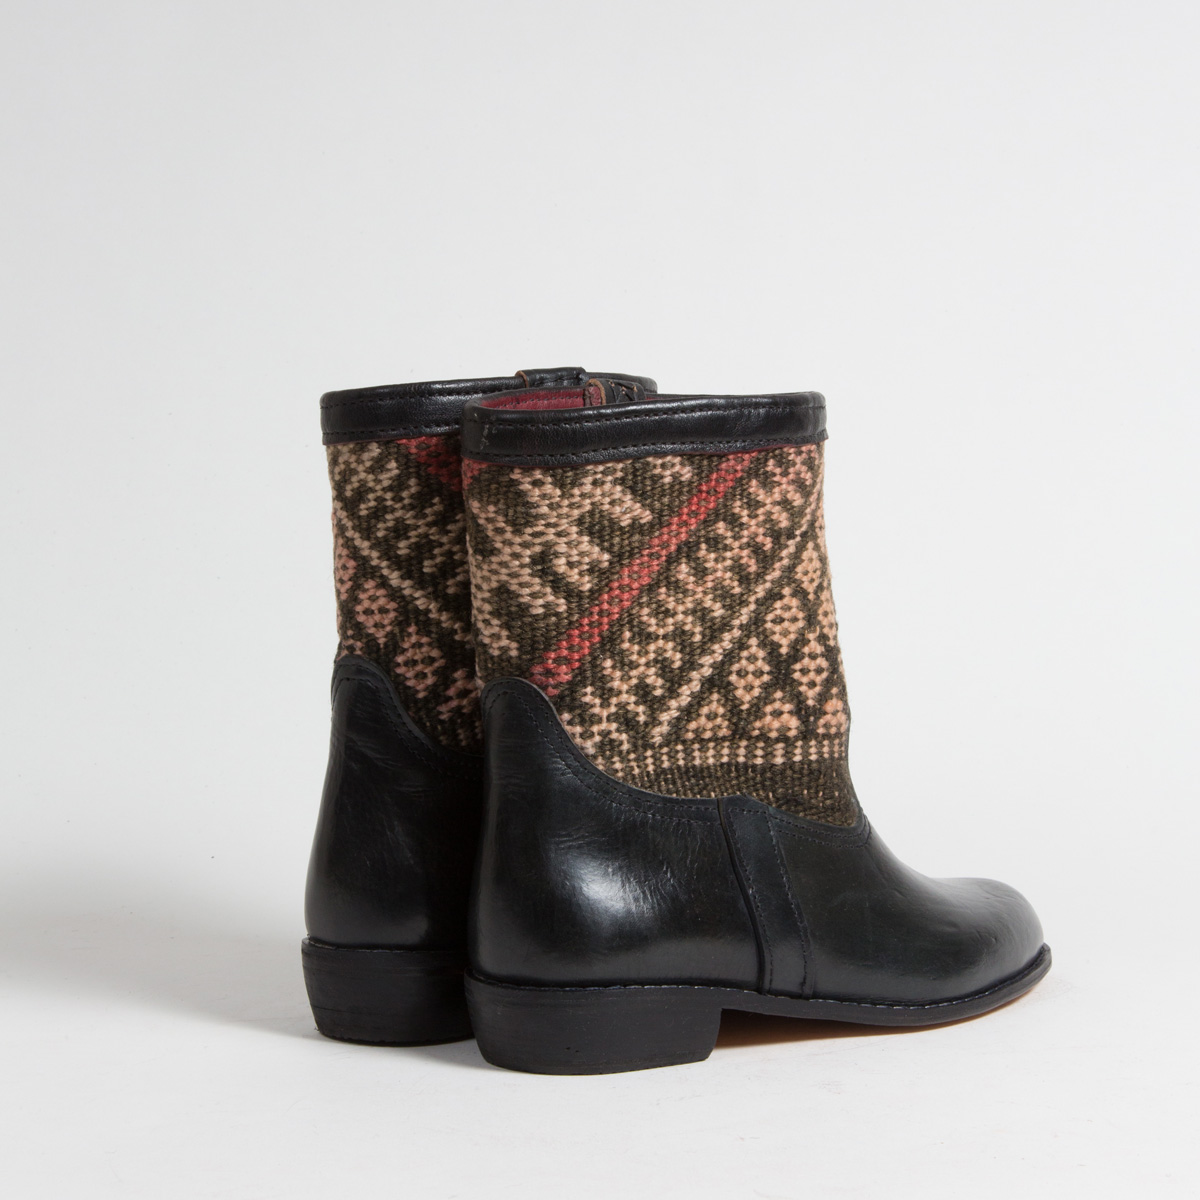 Bottines Kilim cuir mababouche artisanales (Réf. RPN22-40)